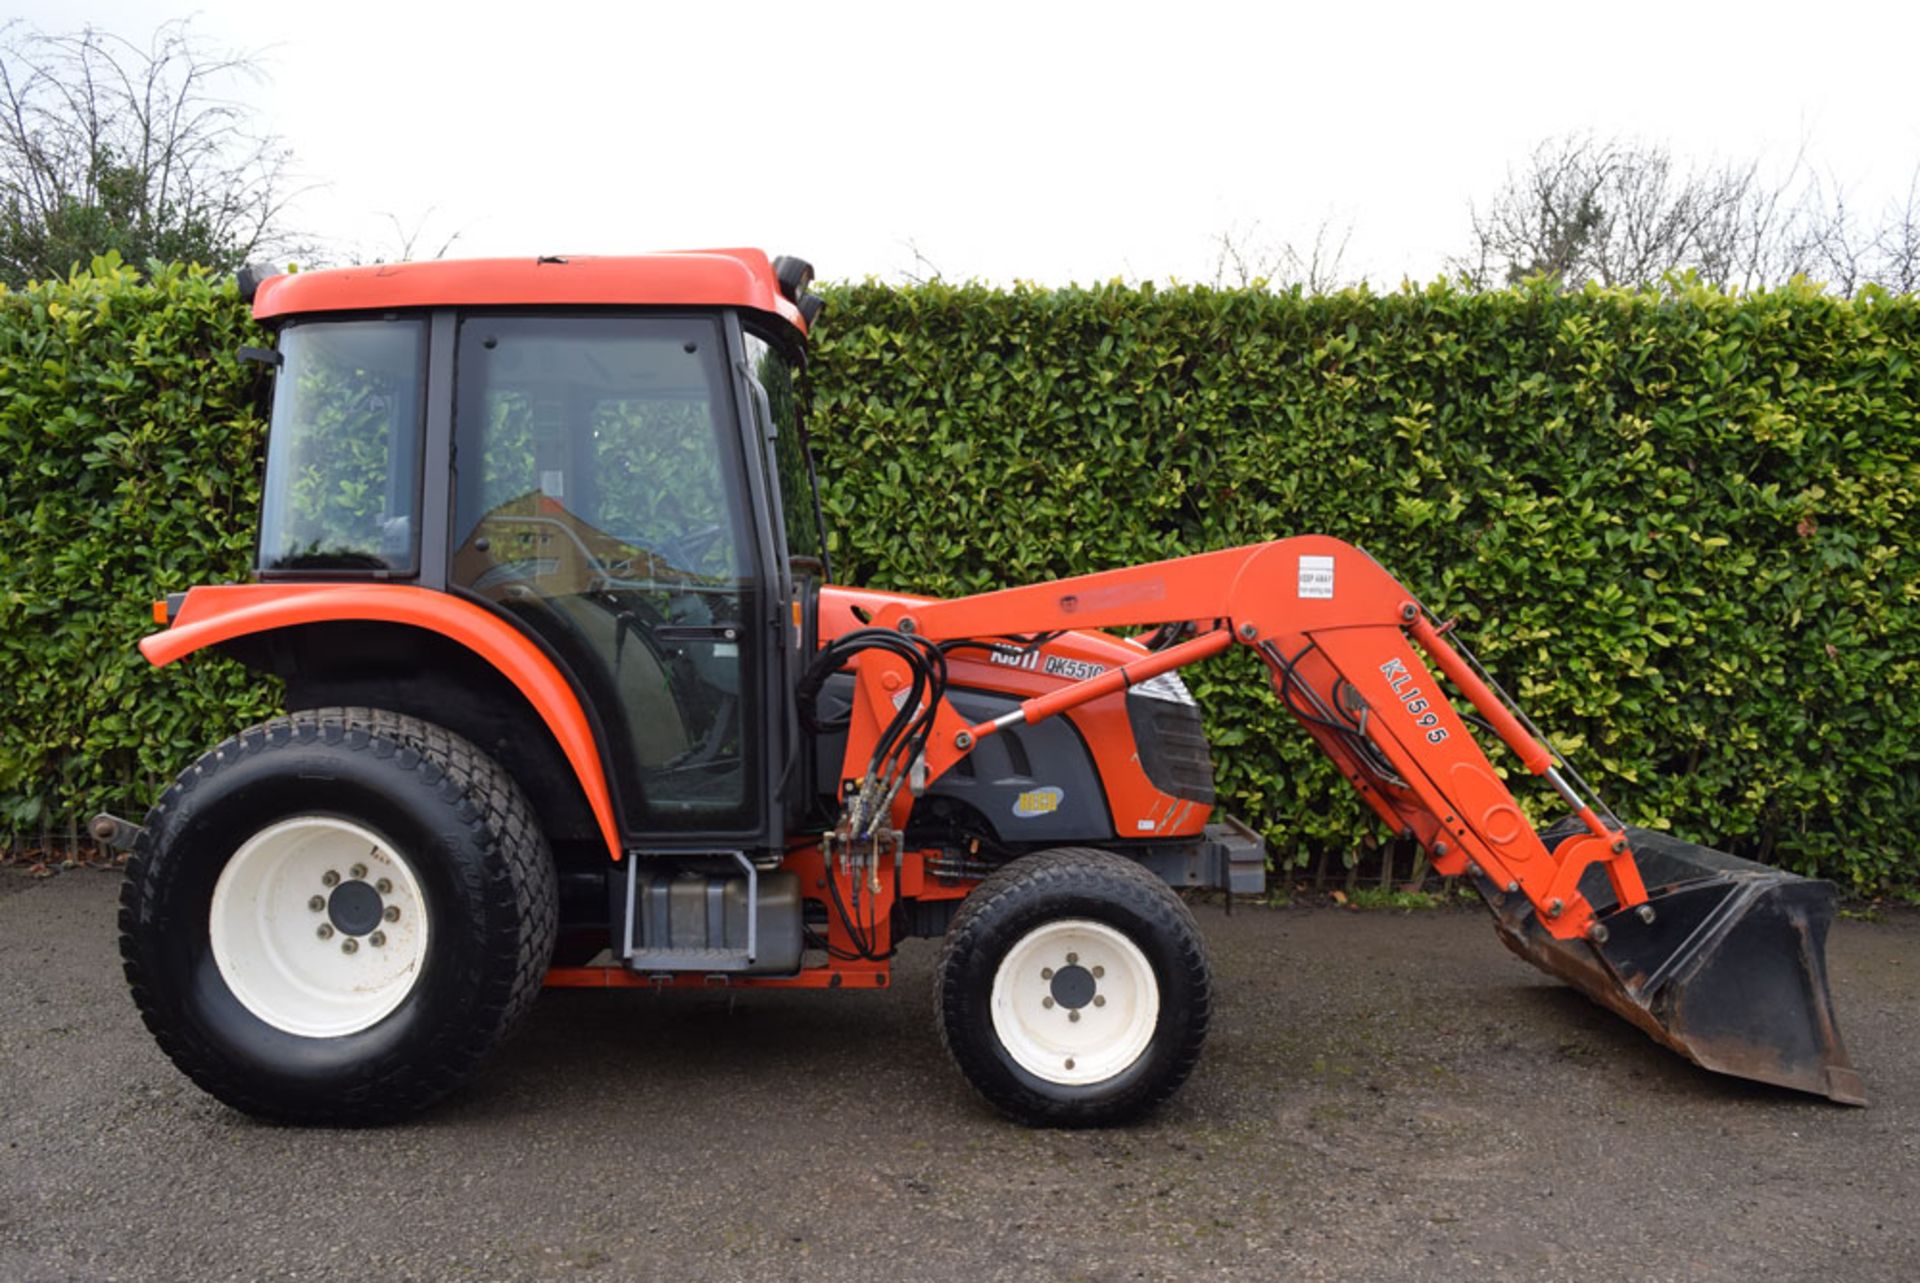 Kioti DK551C Compact Tractor With KL1595 Loader - Image 2 of 4